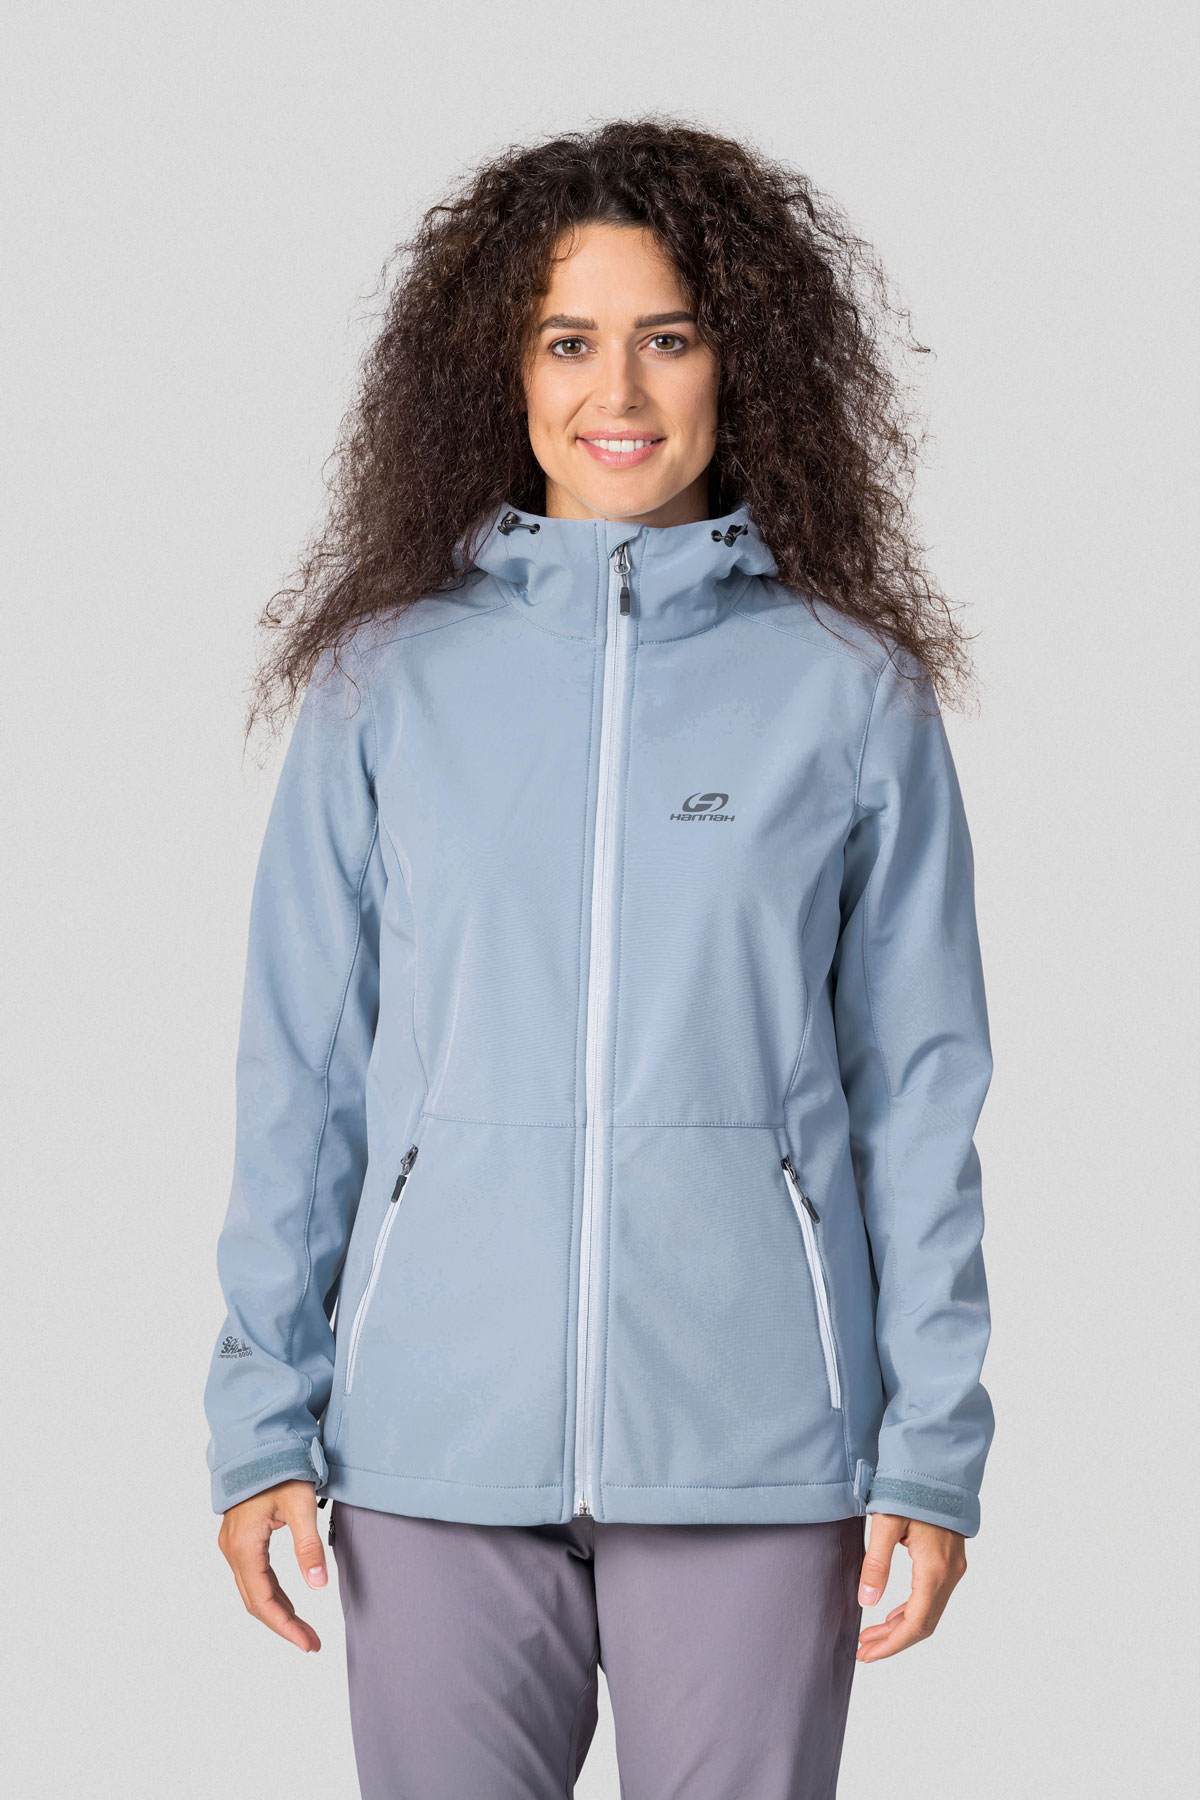 Women’s jacket with a membrane